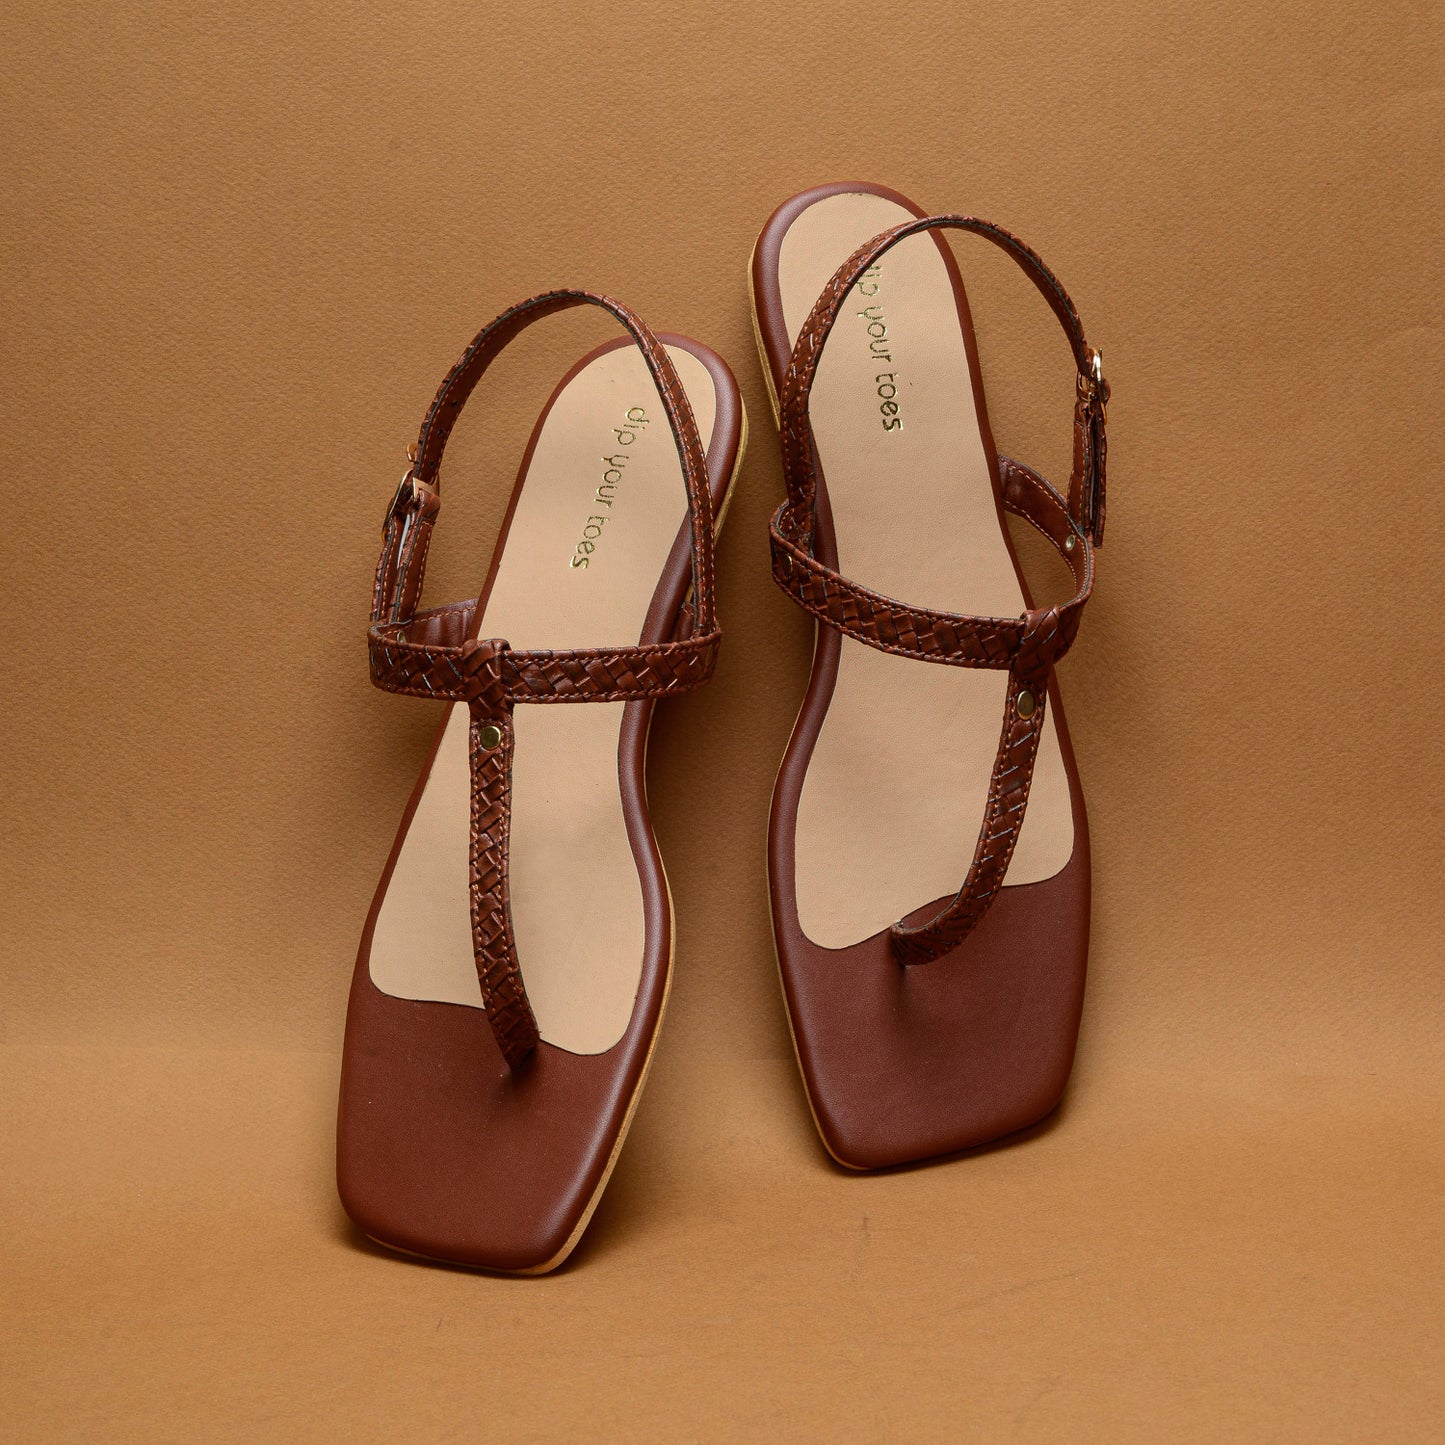 Chocolate brown thong sandals